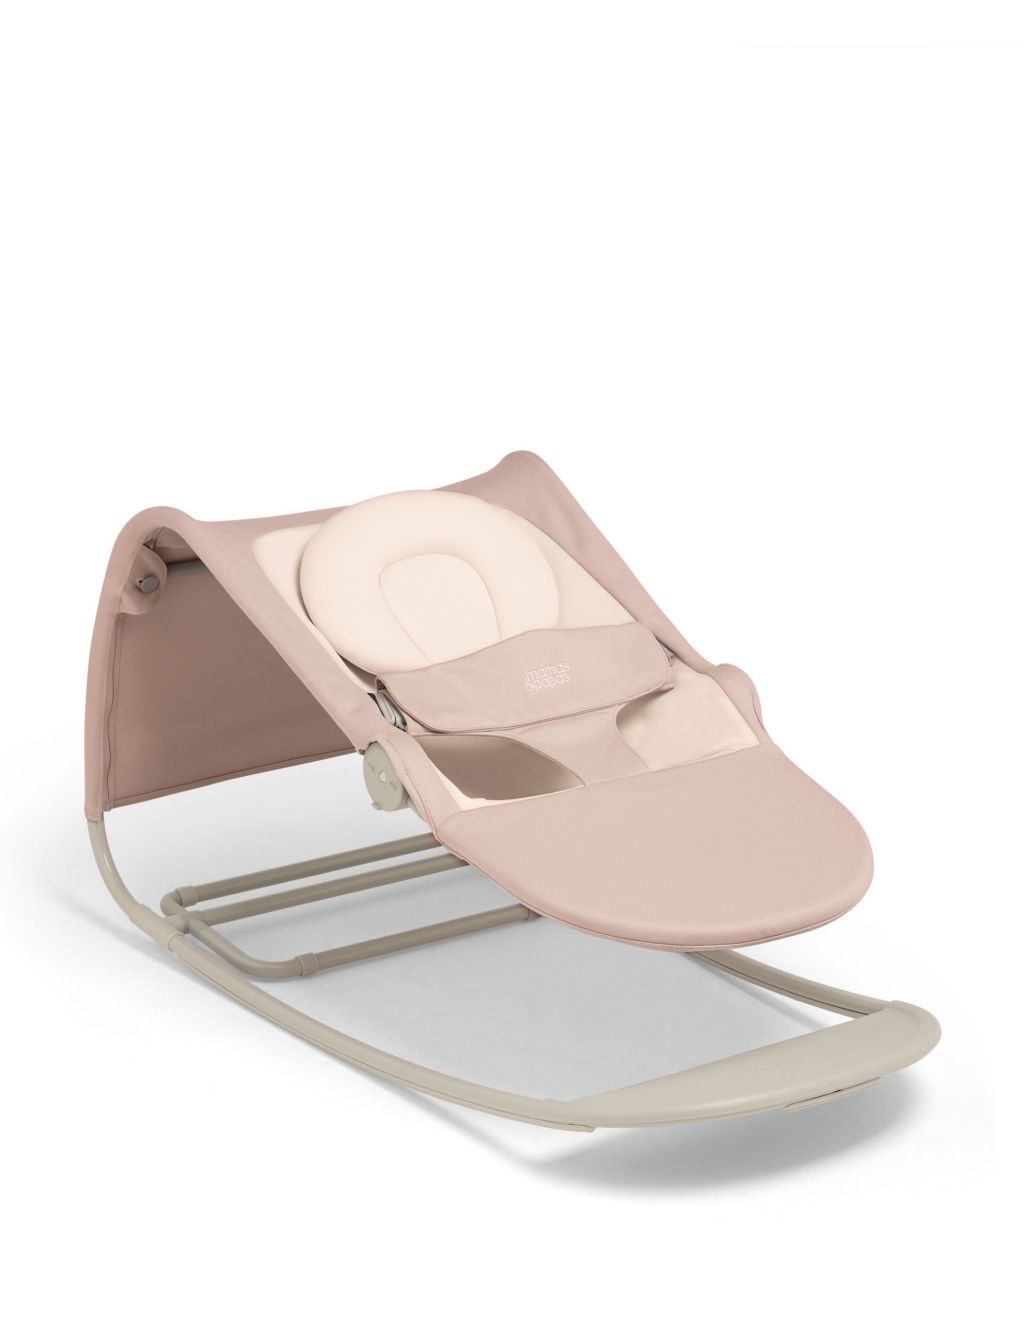 Tempo 3-in-1 Rocker Ivy Bouncer 2 of 8